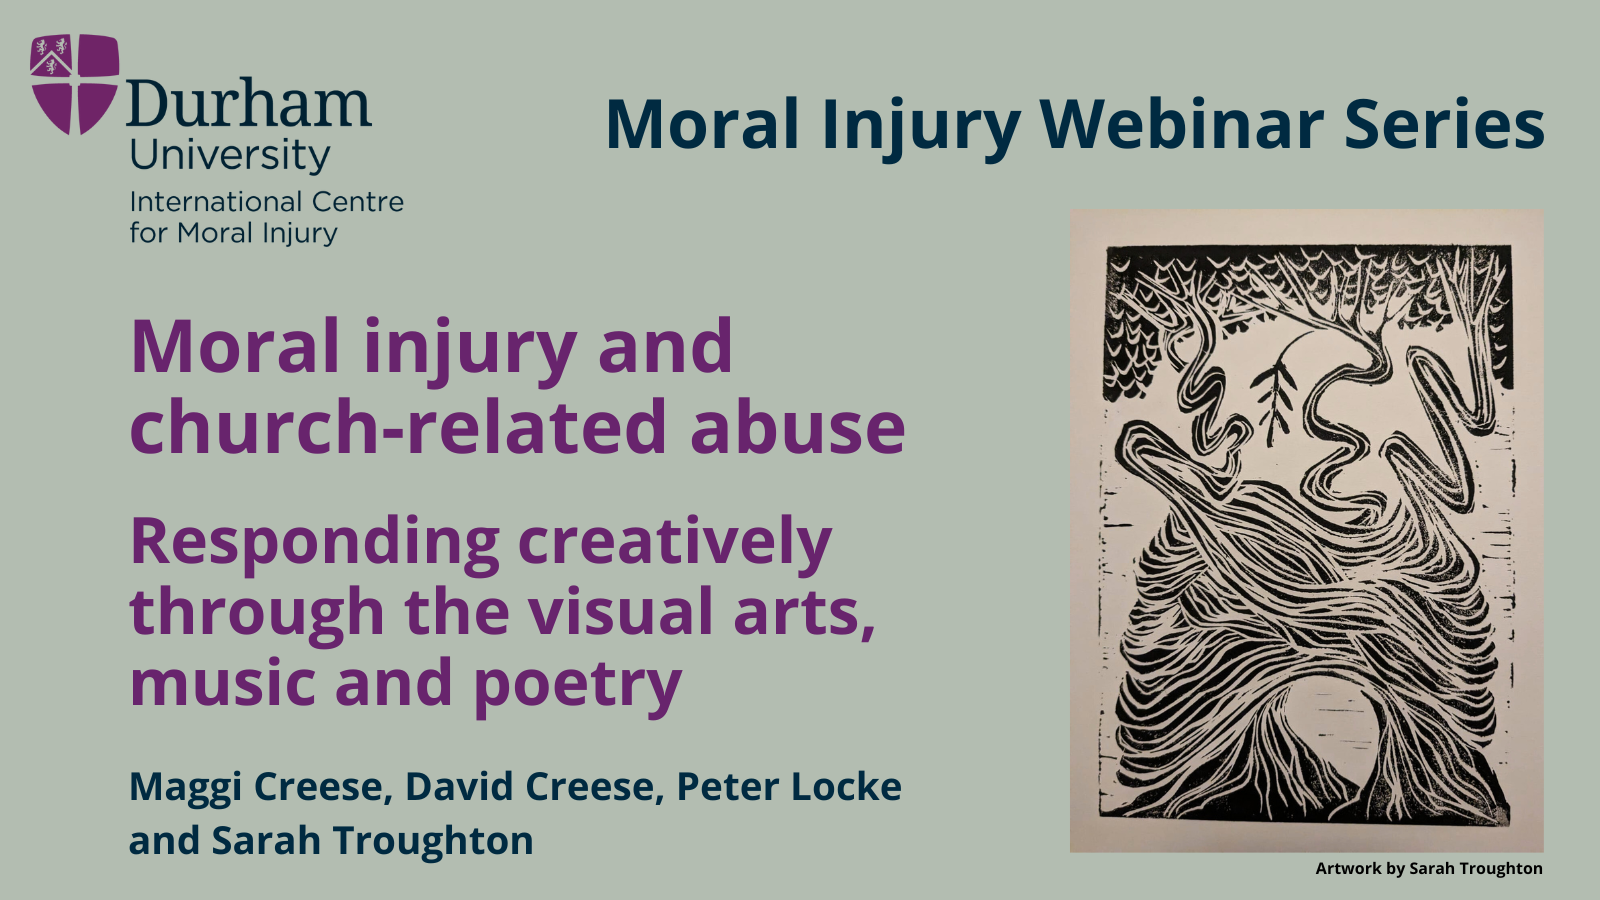 Moral injury and church-related abuse: Responding creatively through the visual arts, music and poetry